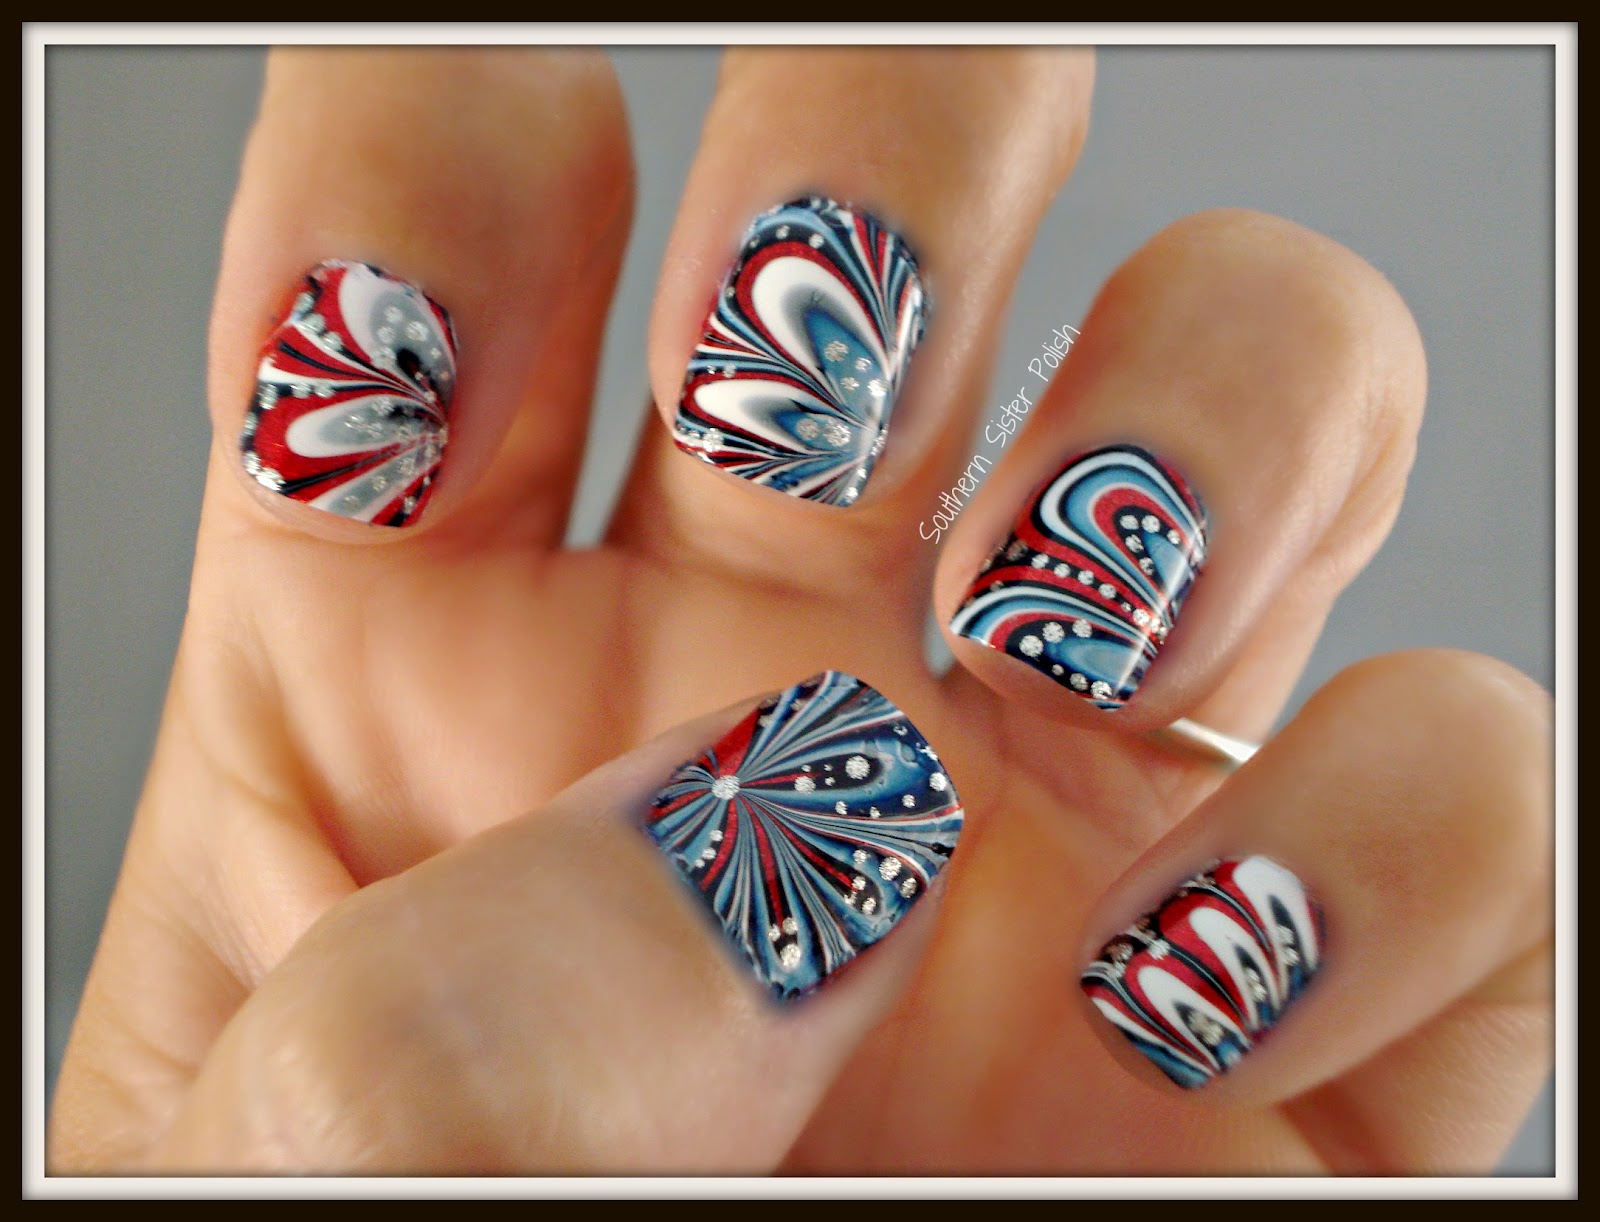 July 4th Nail Art Ideas: Red, White, and Blue Designs - wide 6